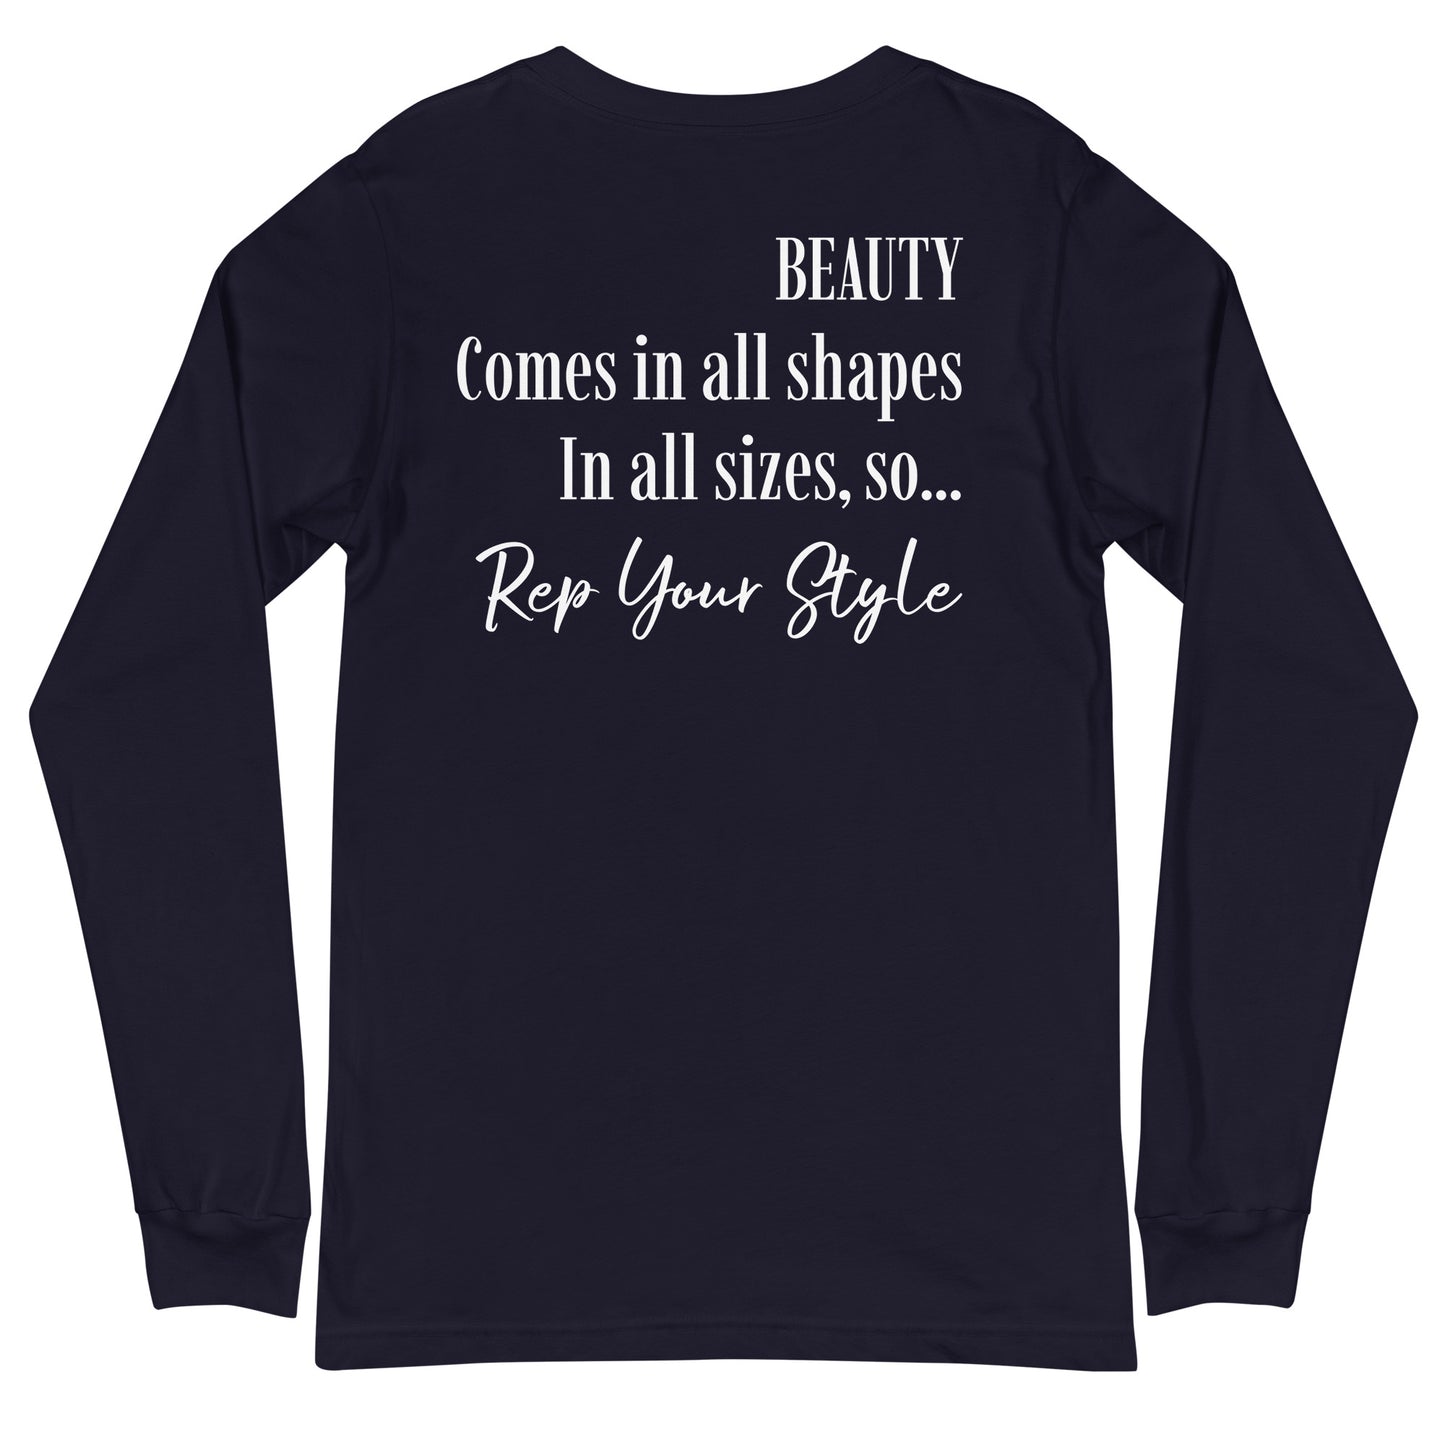 Beauty comes in all sizes navy long sleeve